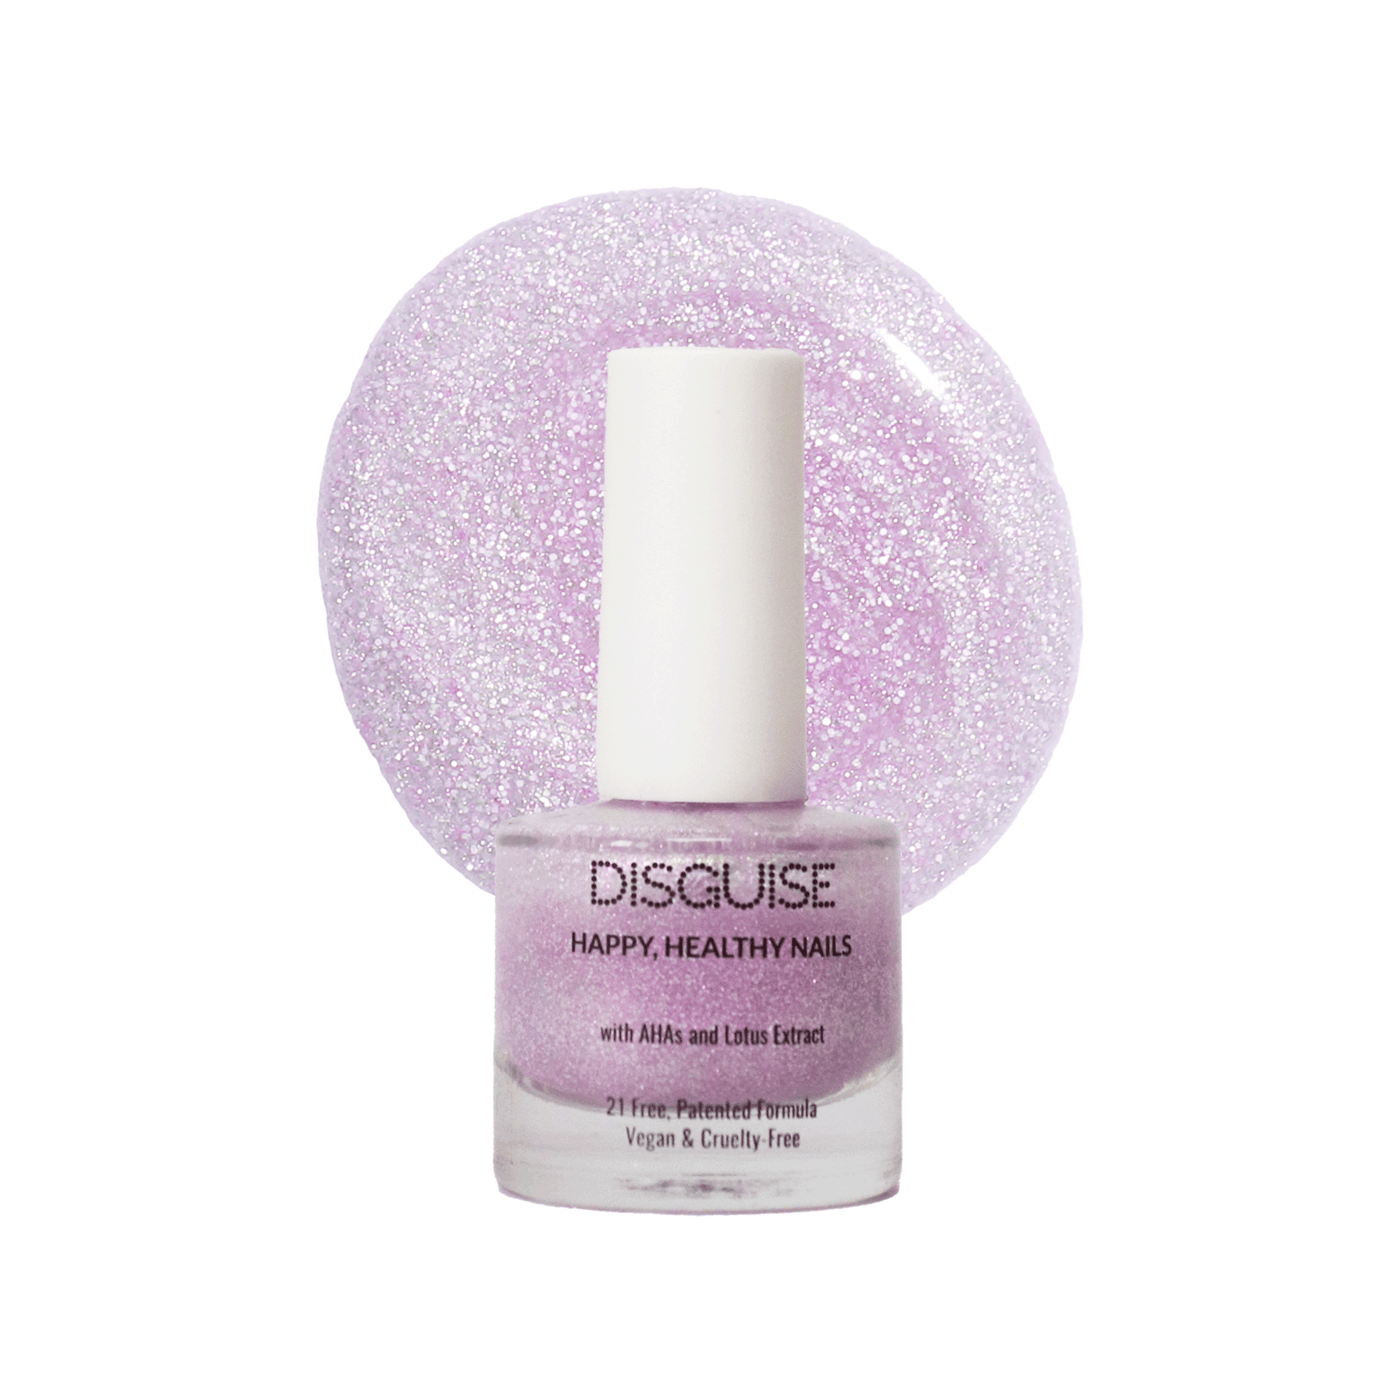 Frosty Violet 131, 21 TOXIN FREE | WITH AHA & LOTUS EXTRACT | INTENSE COLOR | 9 ml